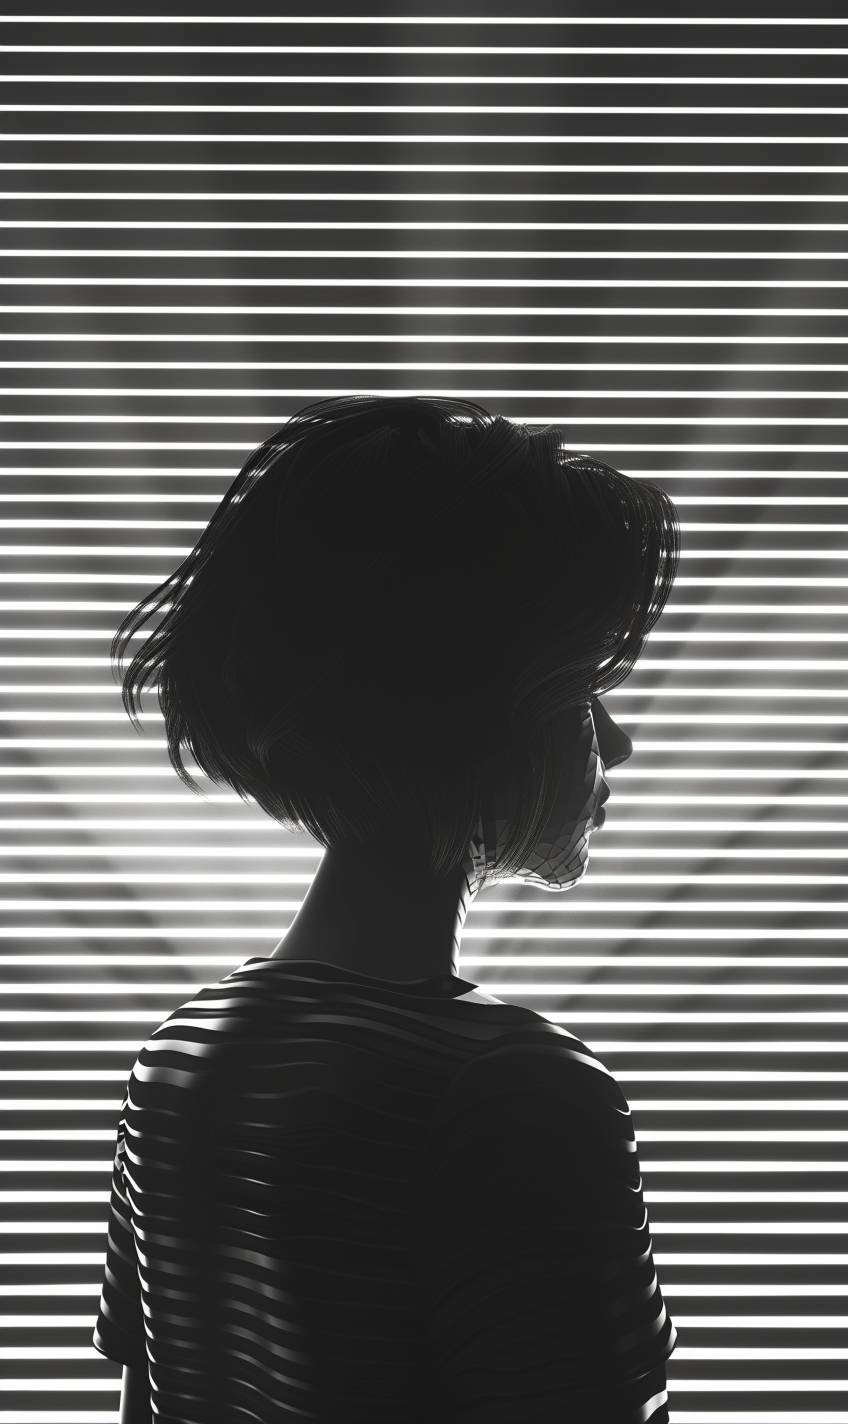 Adorable cartoon style, A young woman stands behind monochrome dim lights. She has short hair and is against a backdrop with monochrome light stripes. Her body is shown in full, and she is wearing a shirt with a simple pattern on the back, 3D render cartoon